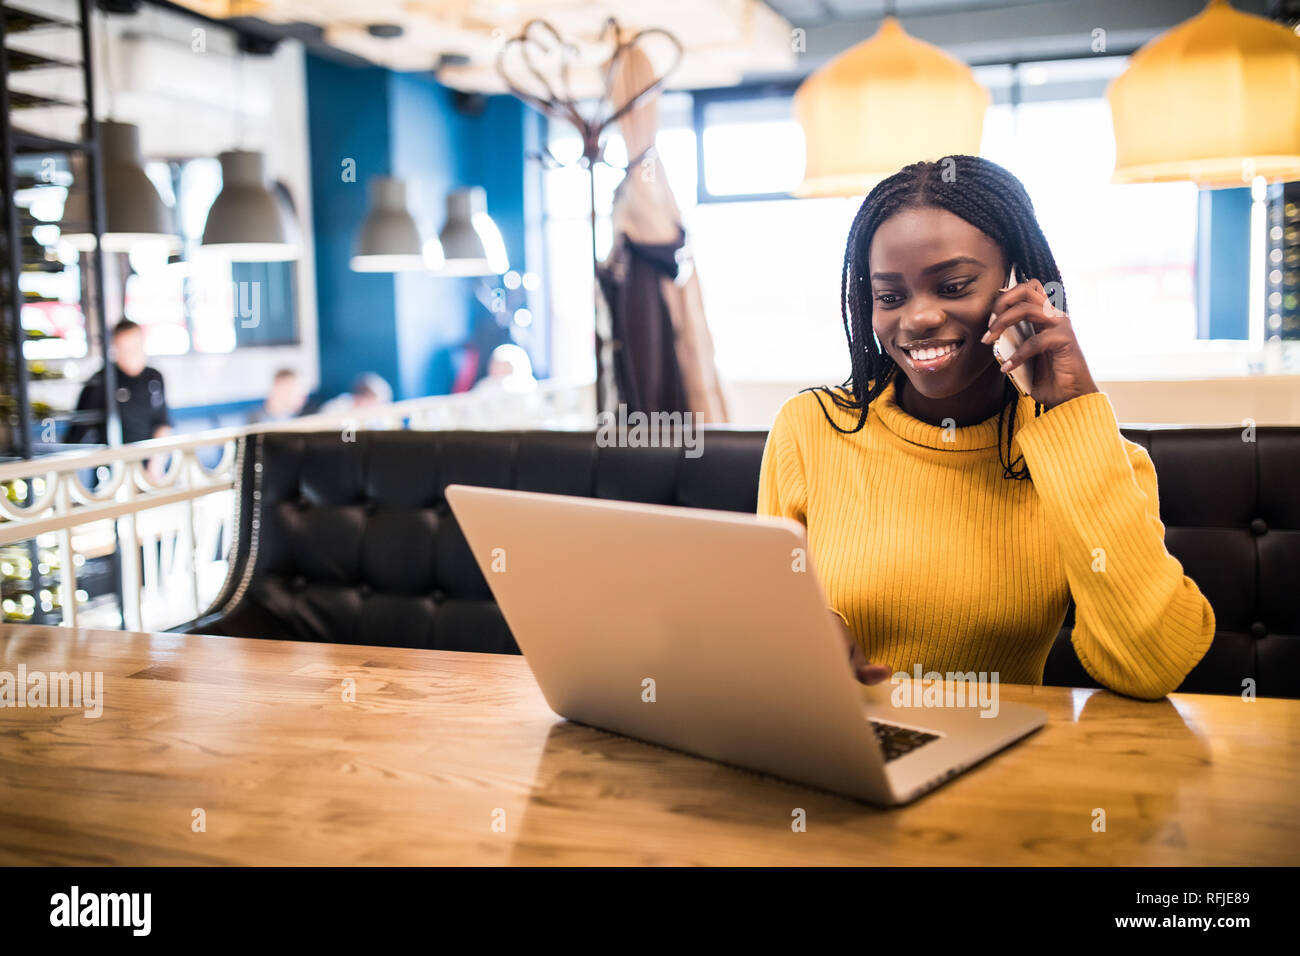 Closeup portrait of young african woman relaxing in cafe with laptop and making phone call Stock Photo